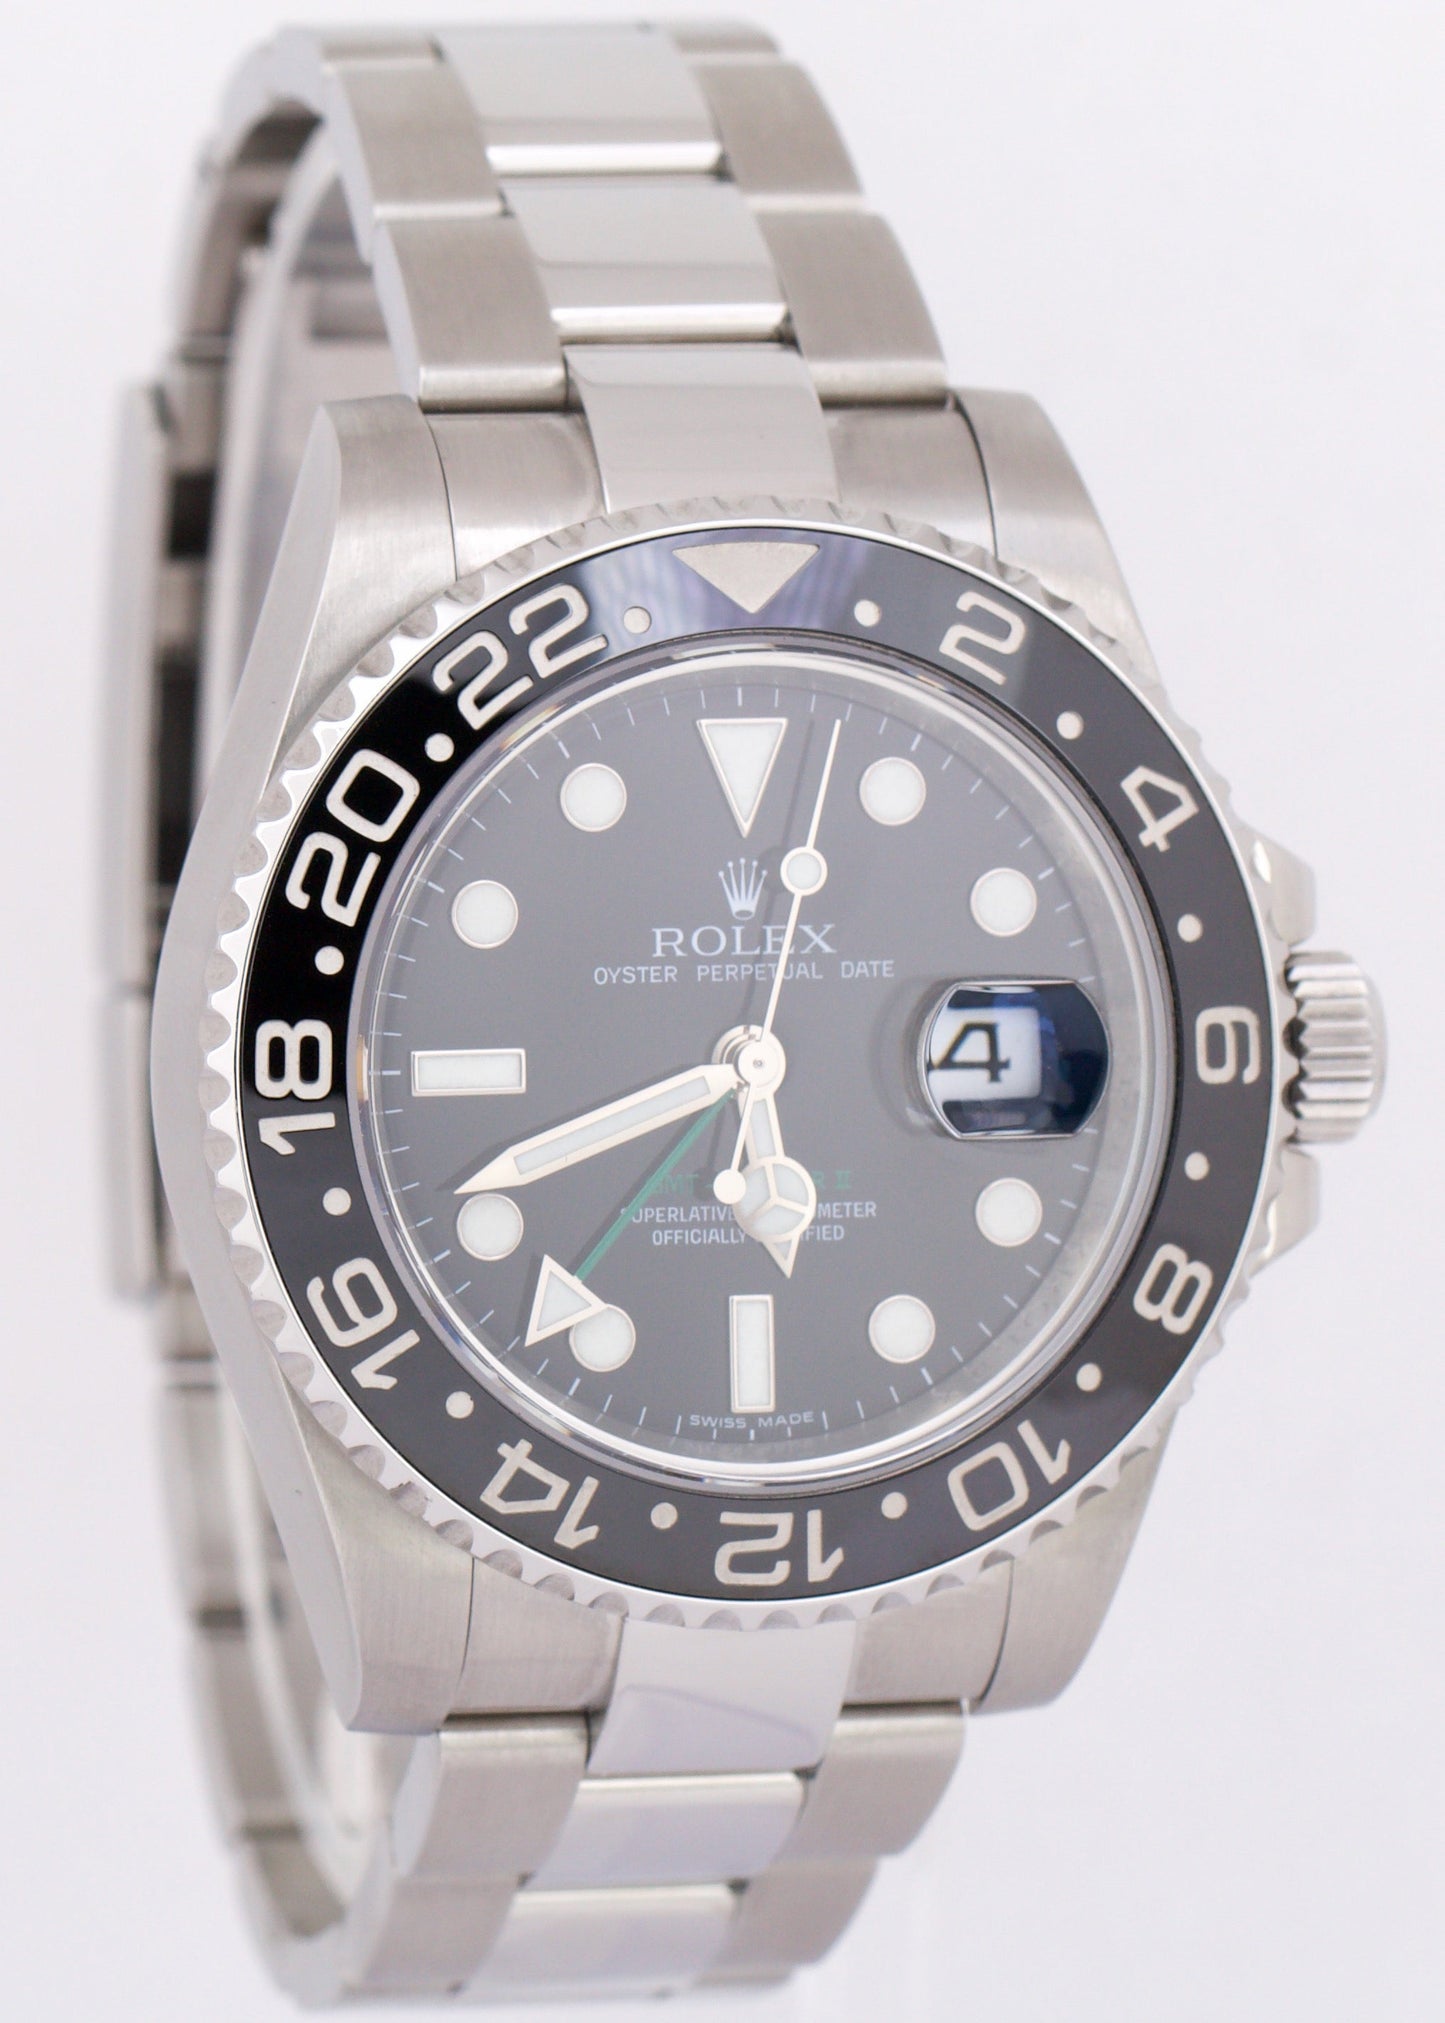 PAPERS Rolex GMT-Master II Black Ceramic Stainless Steel Date 40mm 116710 LN BOX